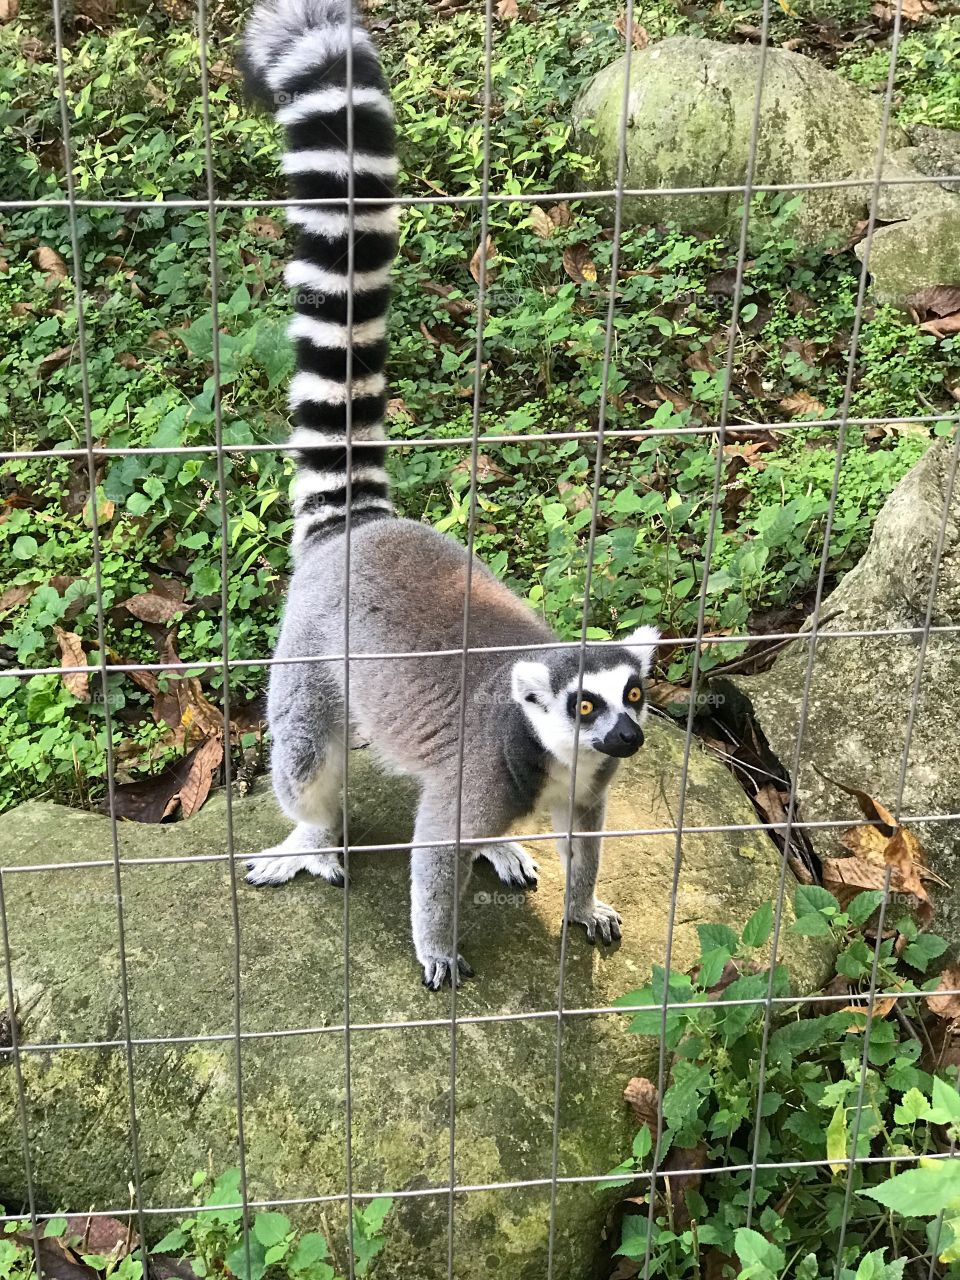 This feisty and personality filled lemur was truly putting on a show at the zoo! His bright eyes and curious personality drew in many new friends! 